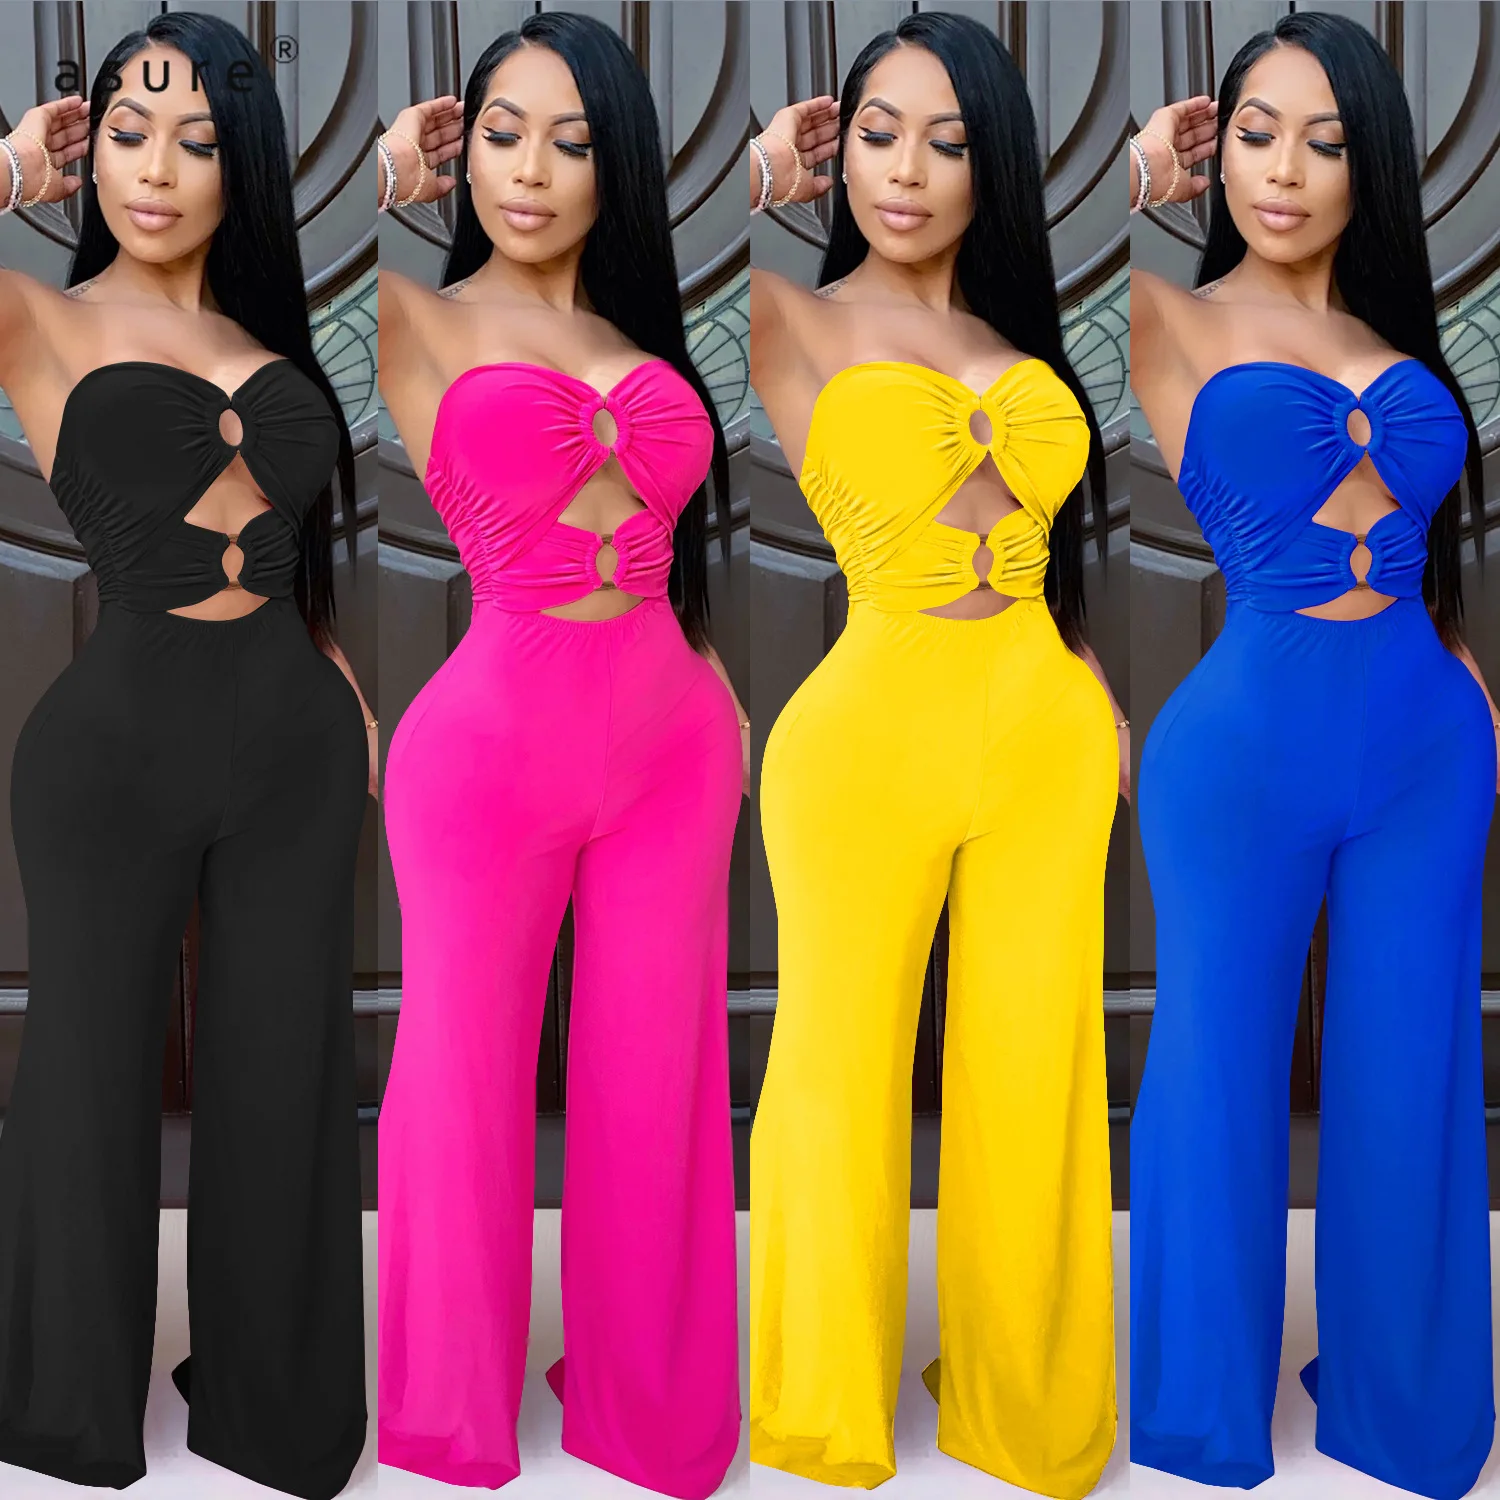 

Jumpsuit Women Pants Body Black Overalls Sexy Femme Baddie Clothes One Piece Club Outfits Tracksuit Elegant Catsuit X3639